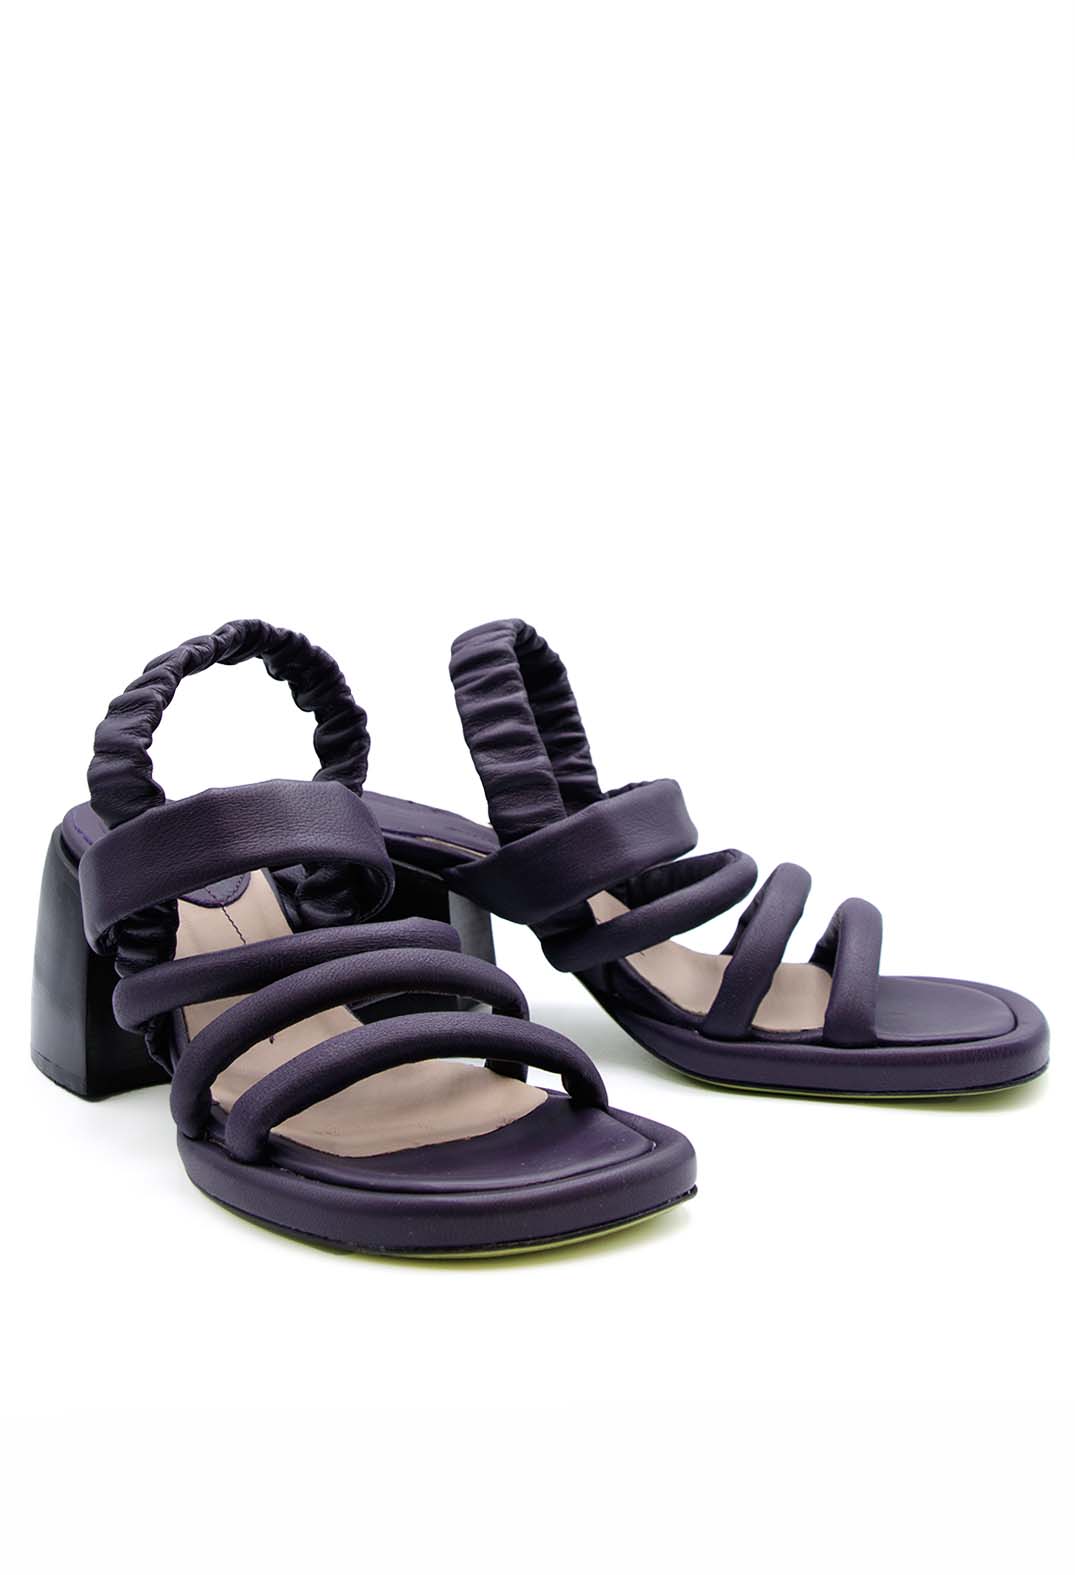 Strappy Heeled Sandals in Amethyst